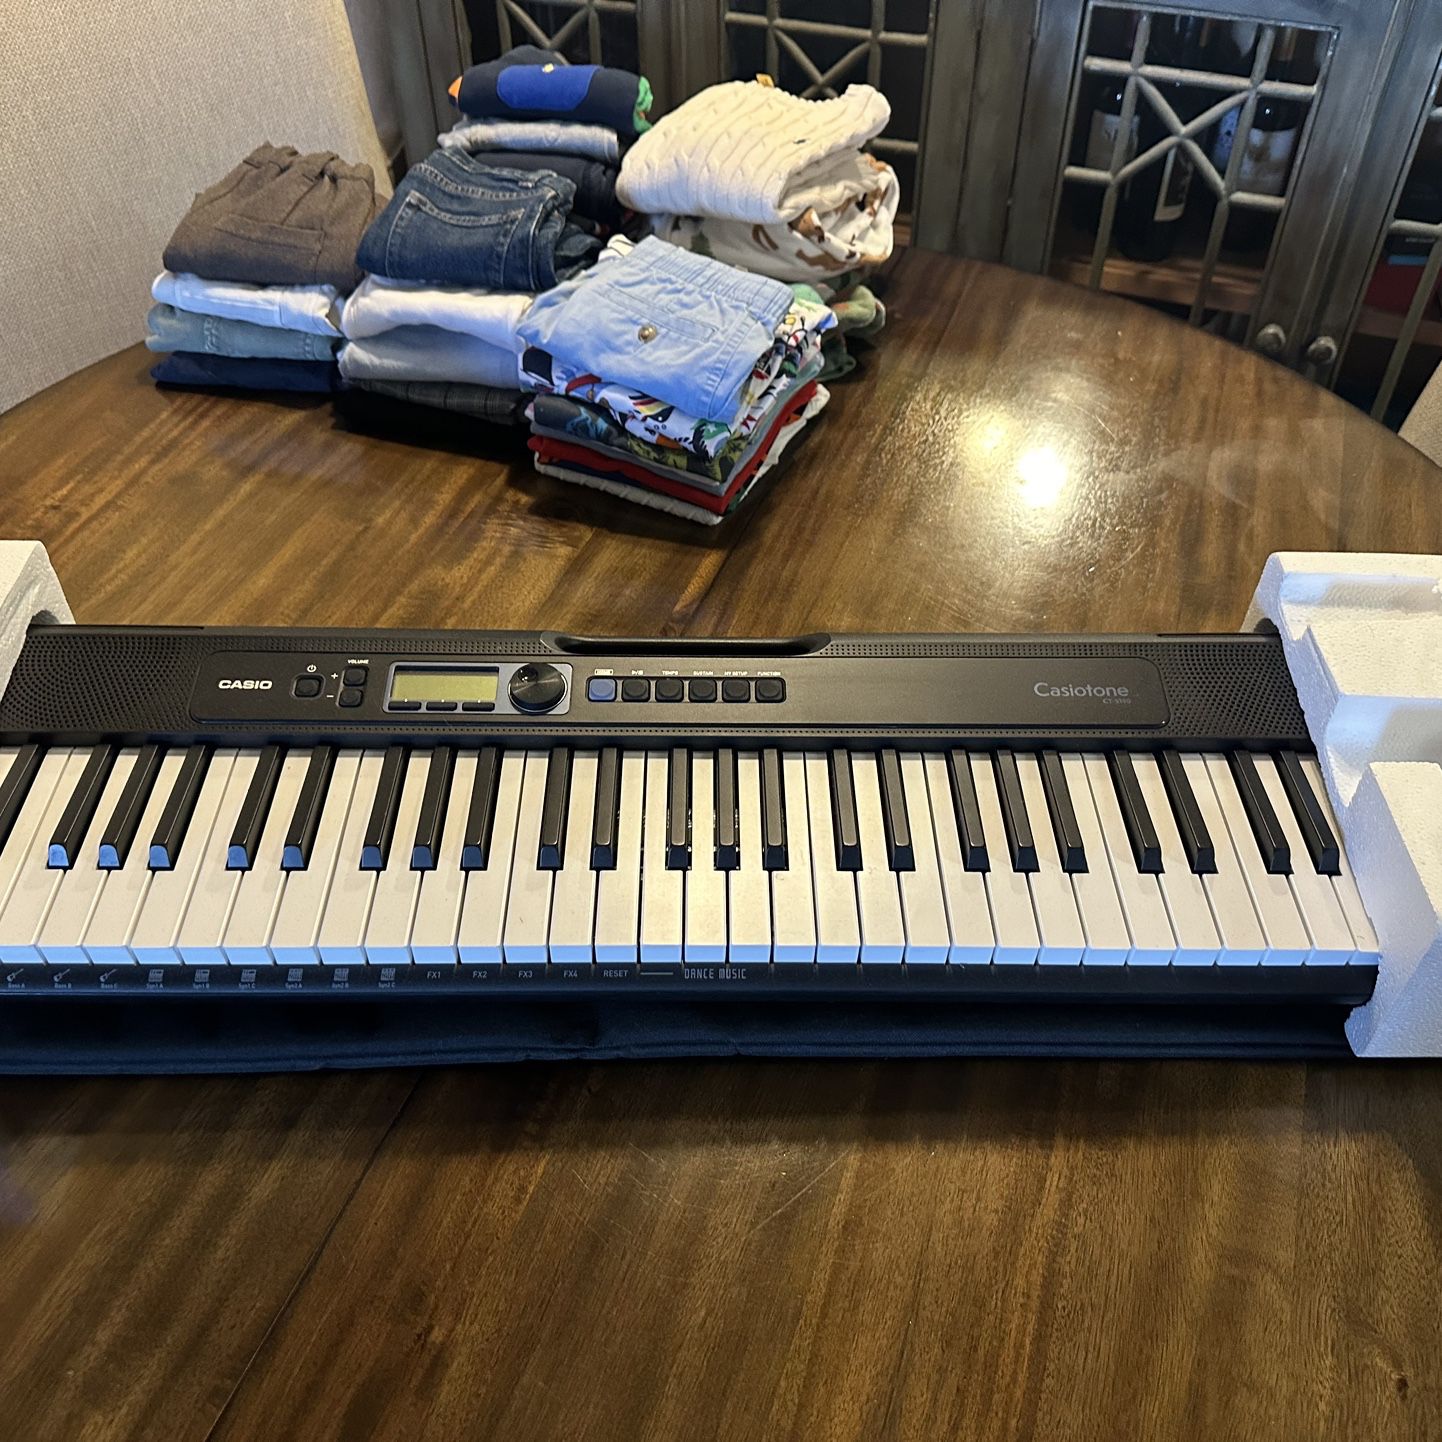 Casio Casiotone, 61-Key Portable Keyboard with USB (CT-S190) w/ Carry Case